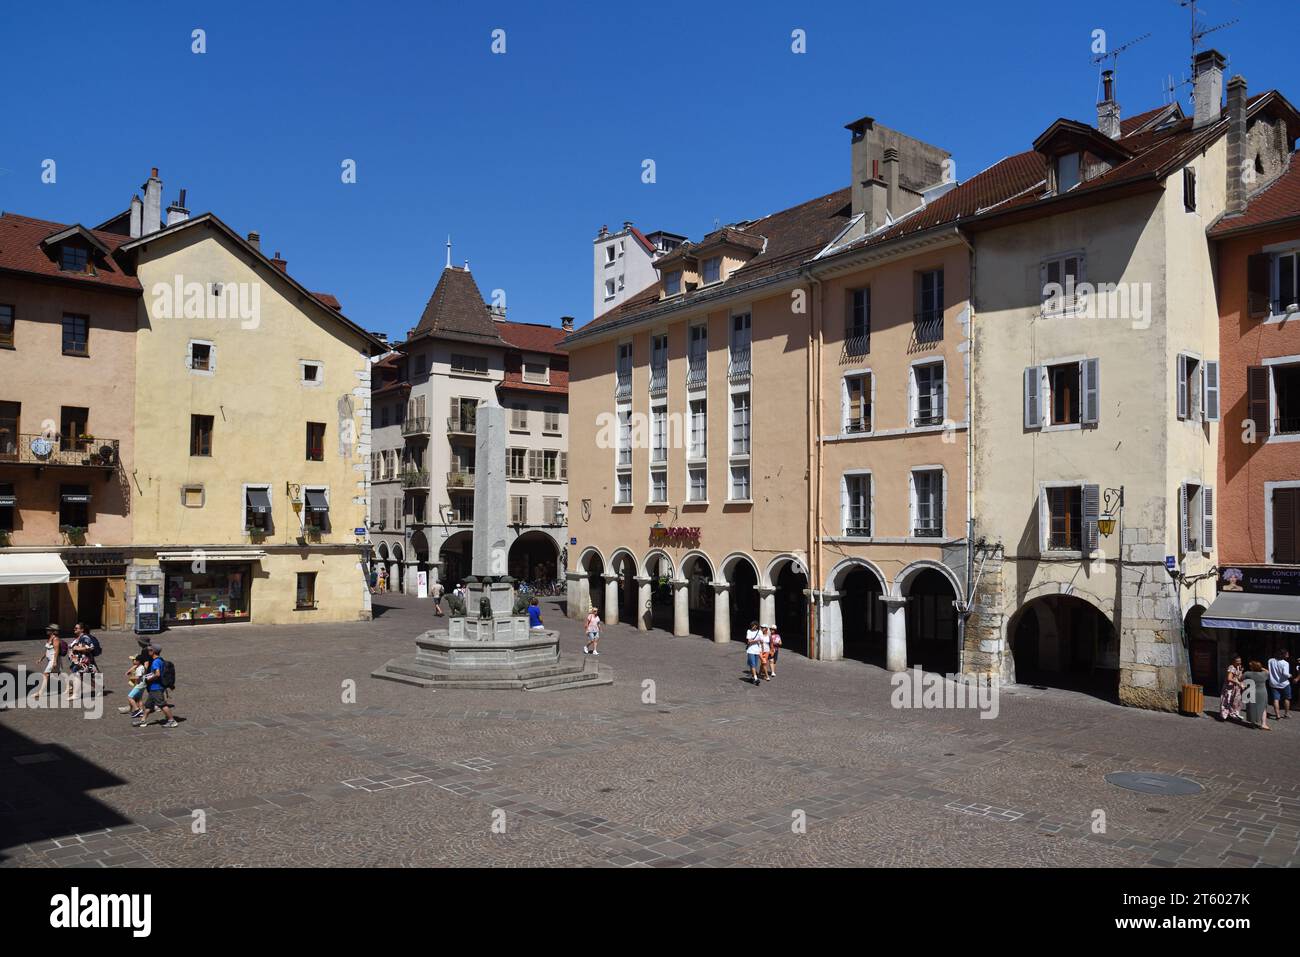 Place Notre-Dame or Town Square and Obelisk Street Fountain & Traditional Architecture in Old Town or Historic District of Annecy Haute-Savoie France Stock Photo